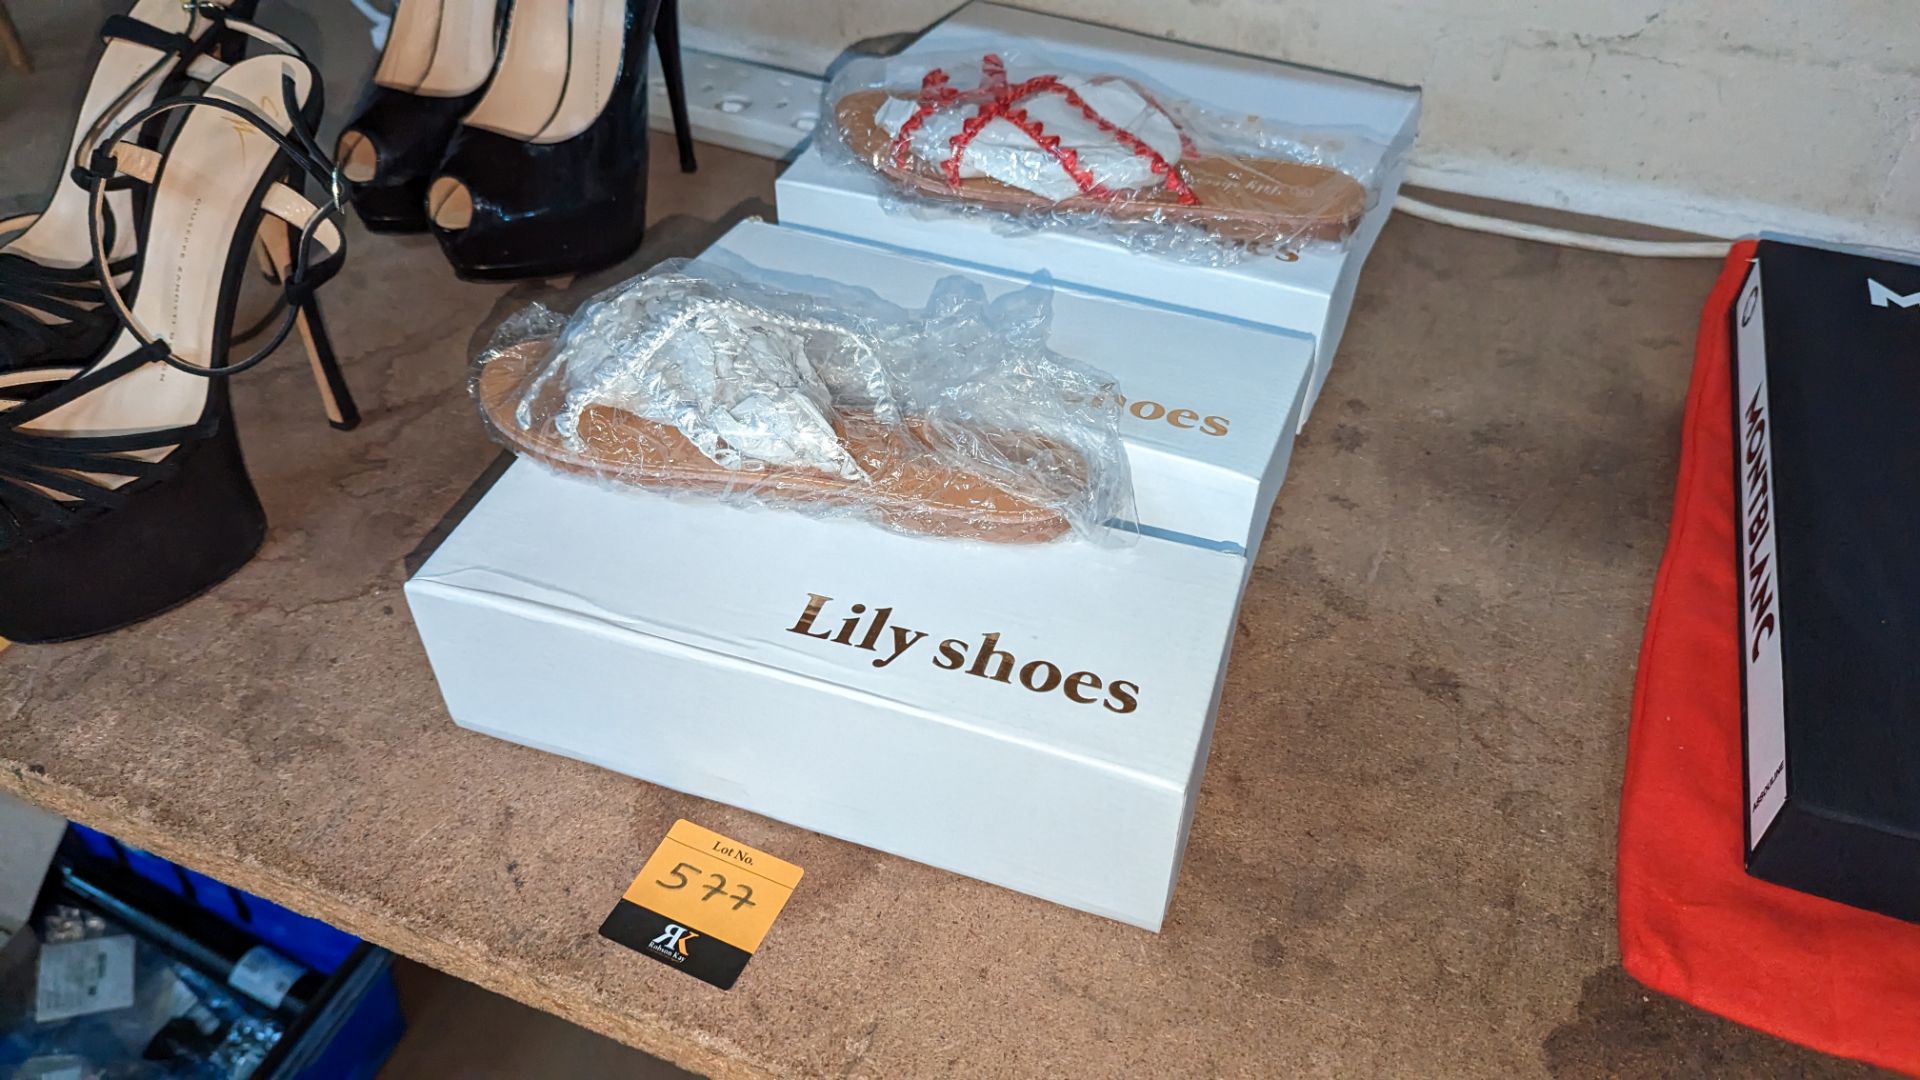 4 pairs of ladies shoes by Lily, in 2 different styles, each pair being individually boxed